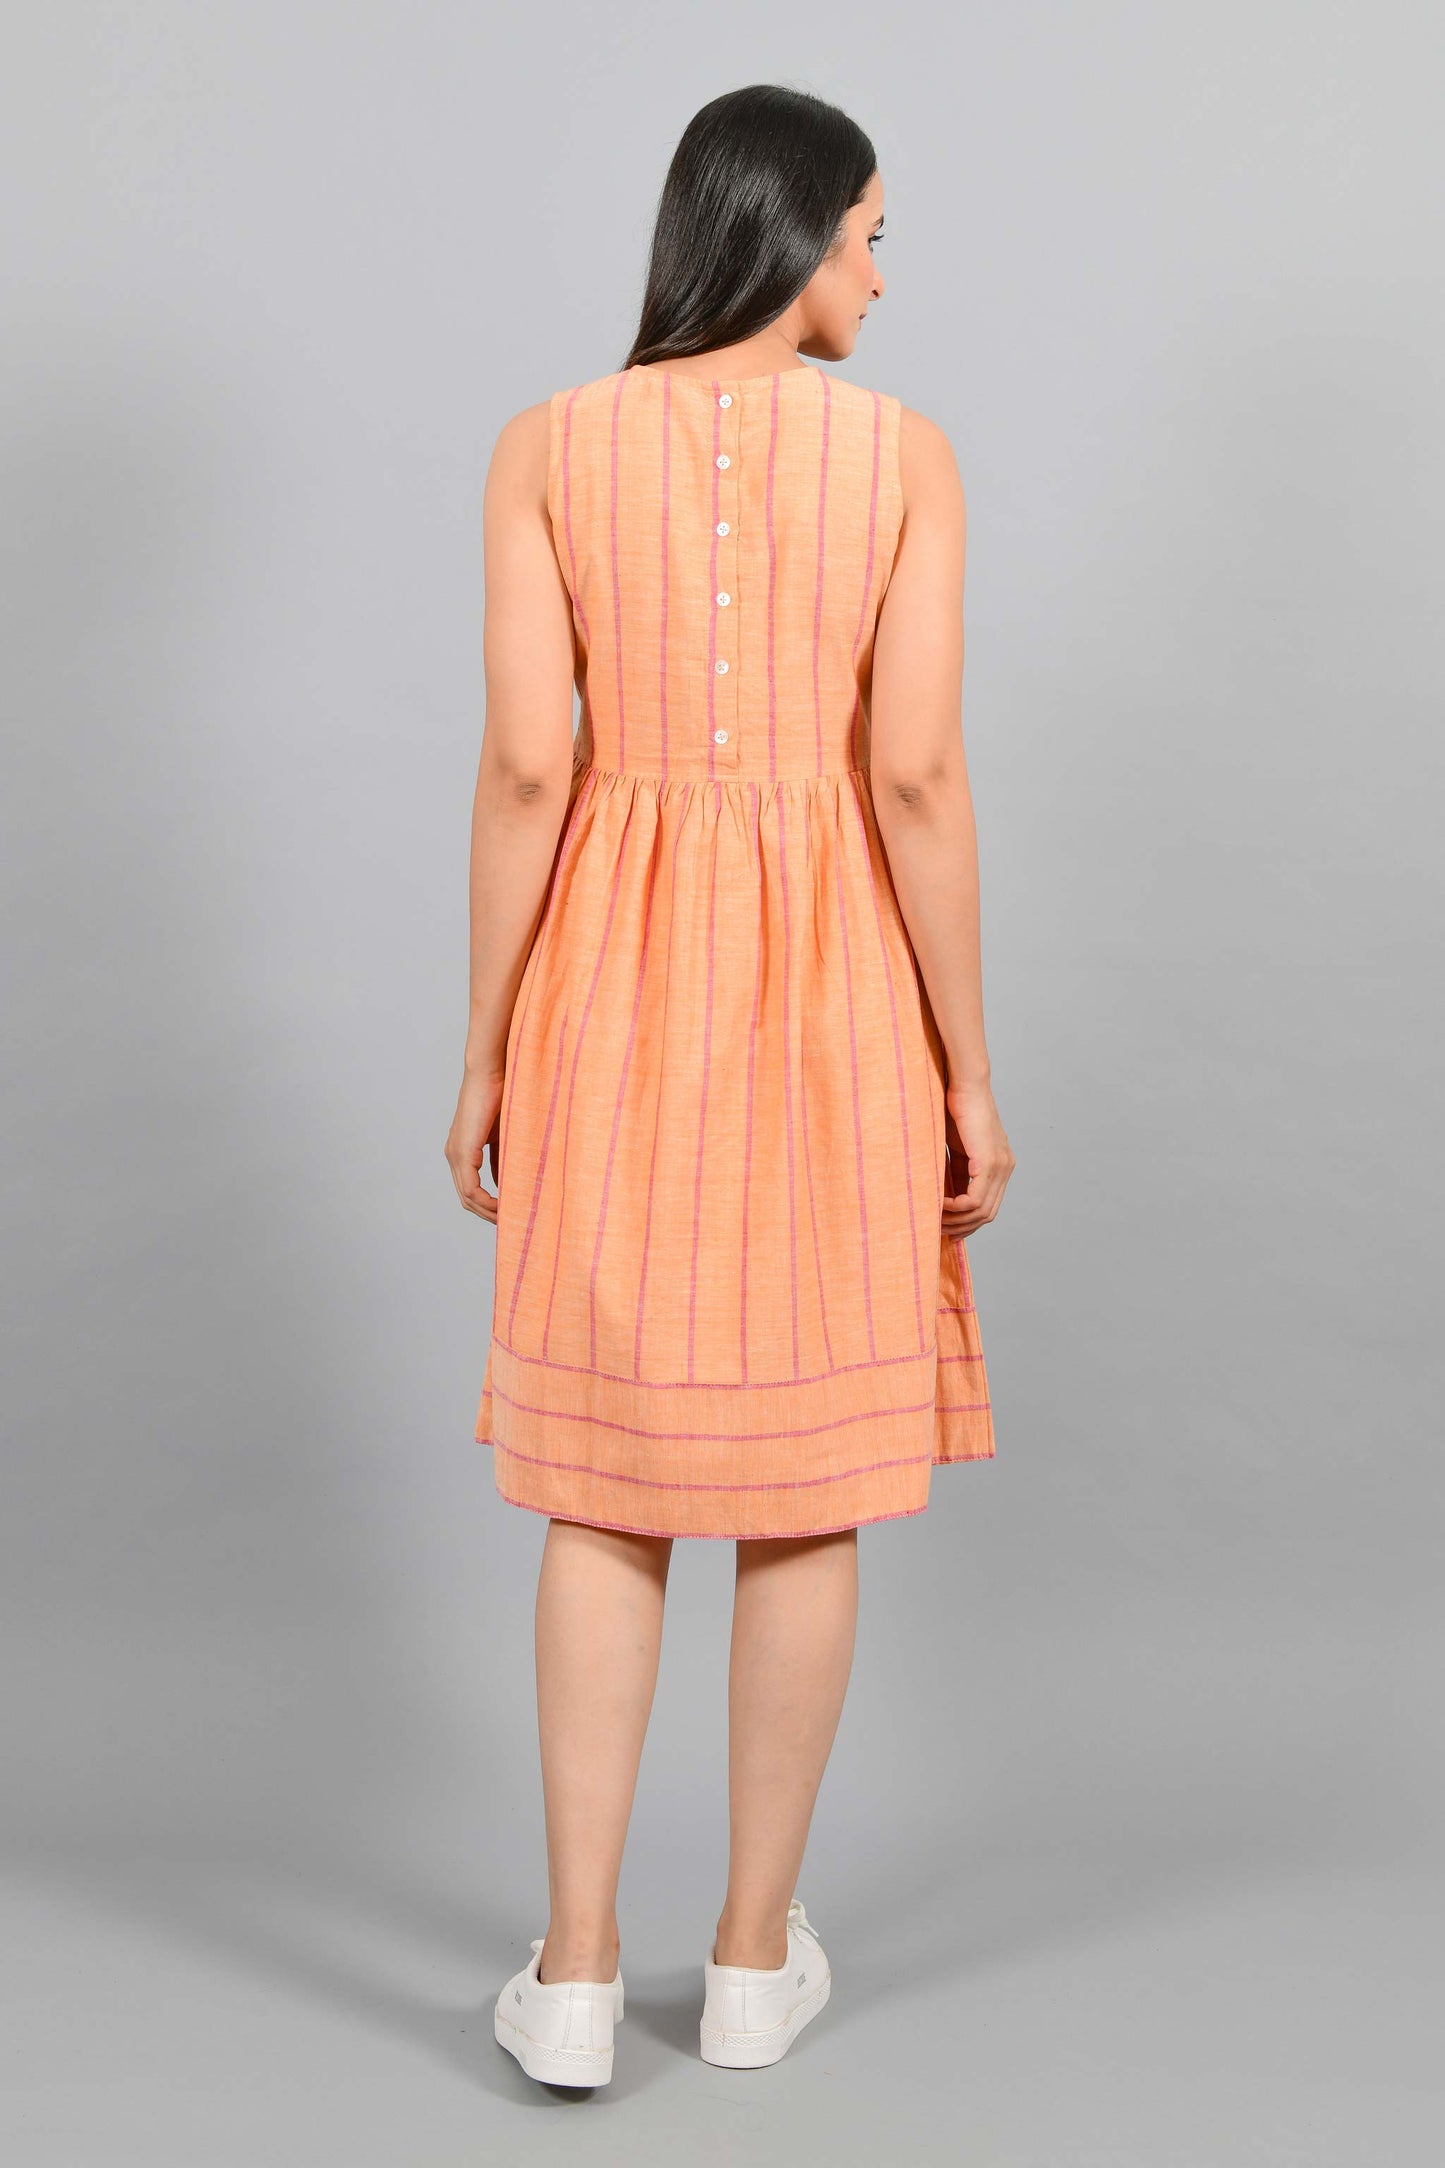 Back pose of an Indian female womenswear fashion model in a orange chambray handspun and handwoven khadi cotton with red stripes by Cotton Rack. The dress has gathers at waist. and the stripes are arranged in attractive manner.